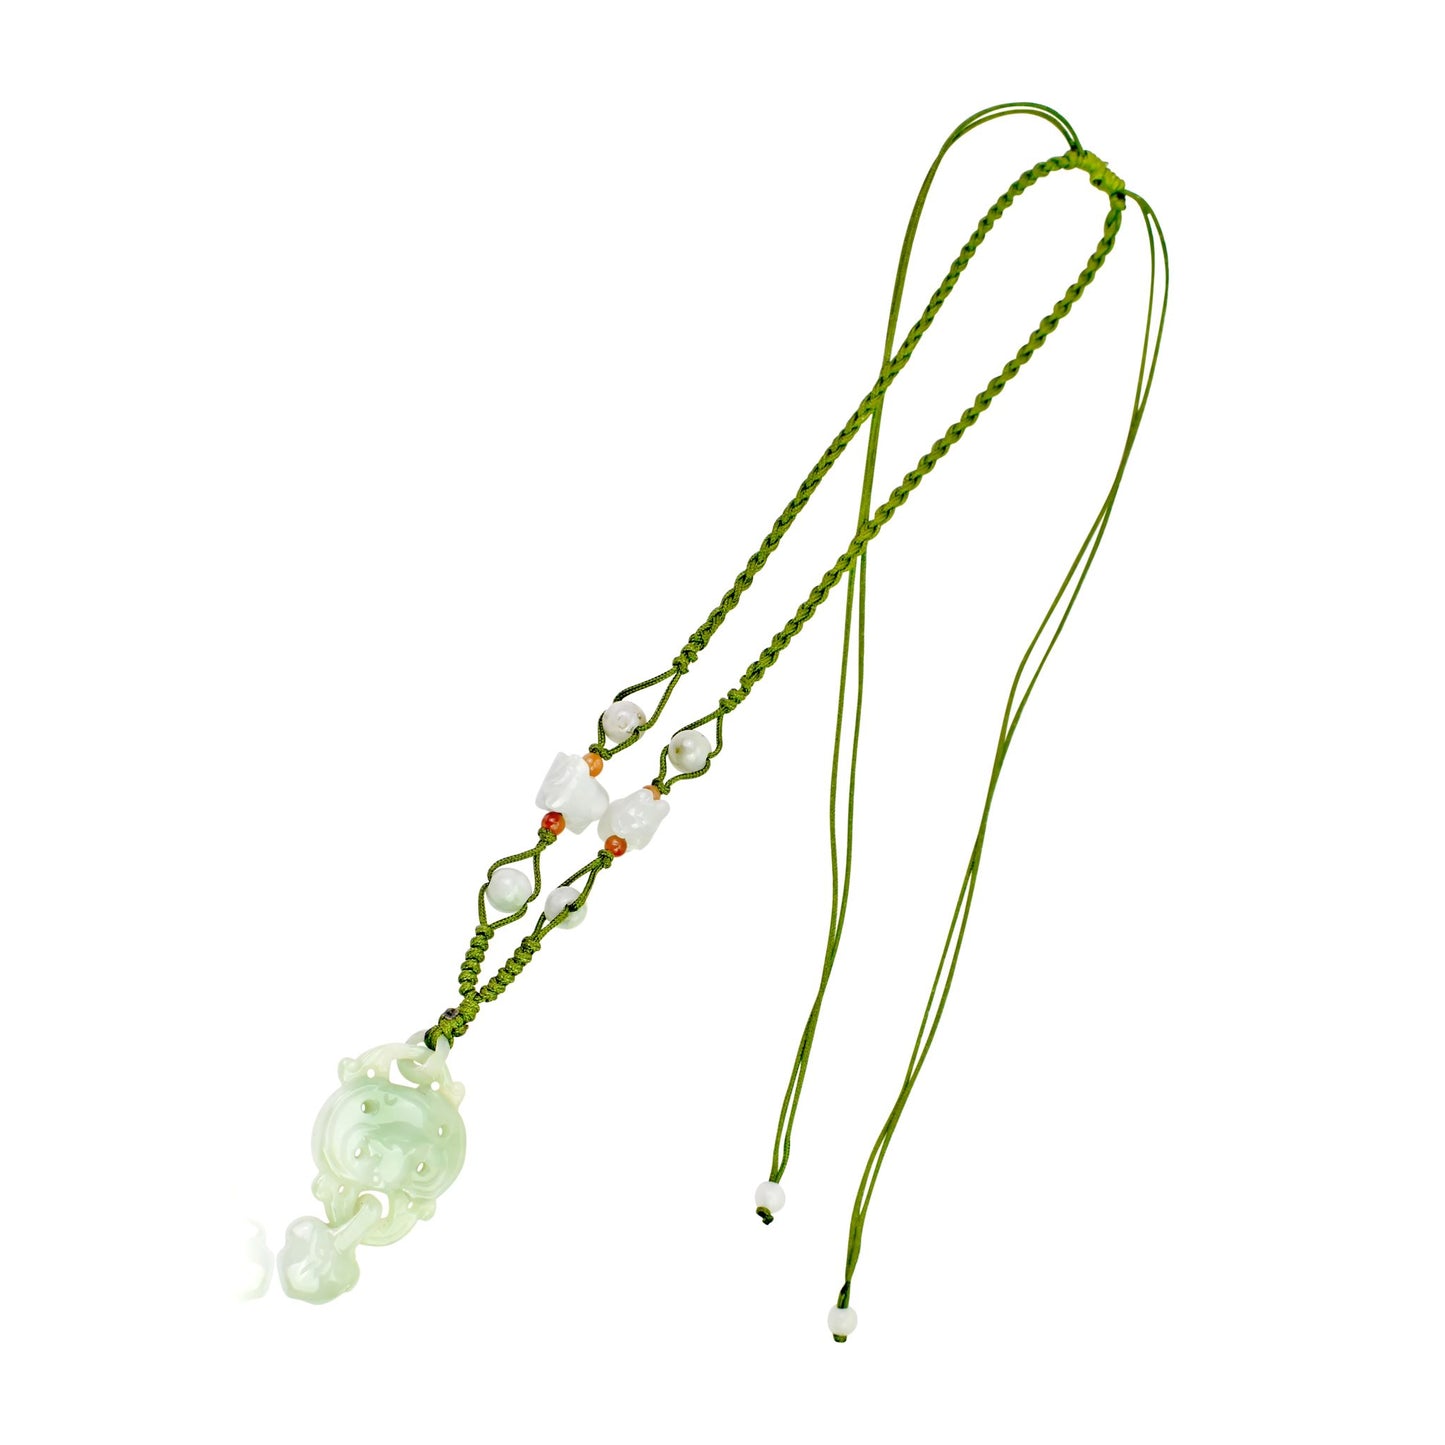 Elevate your Luck with Bat and Heart Handmade Jade Necklace Pendant made with Green Cord